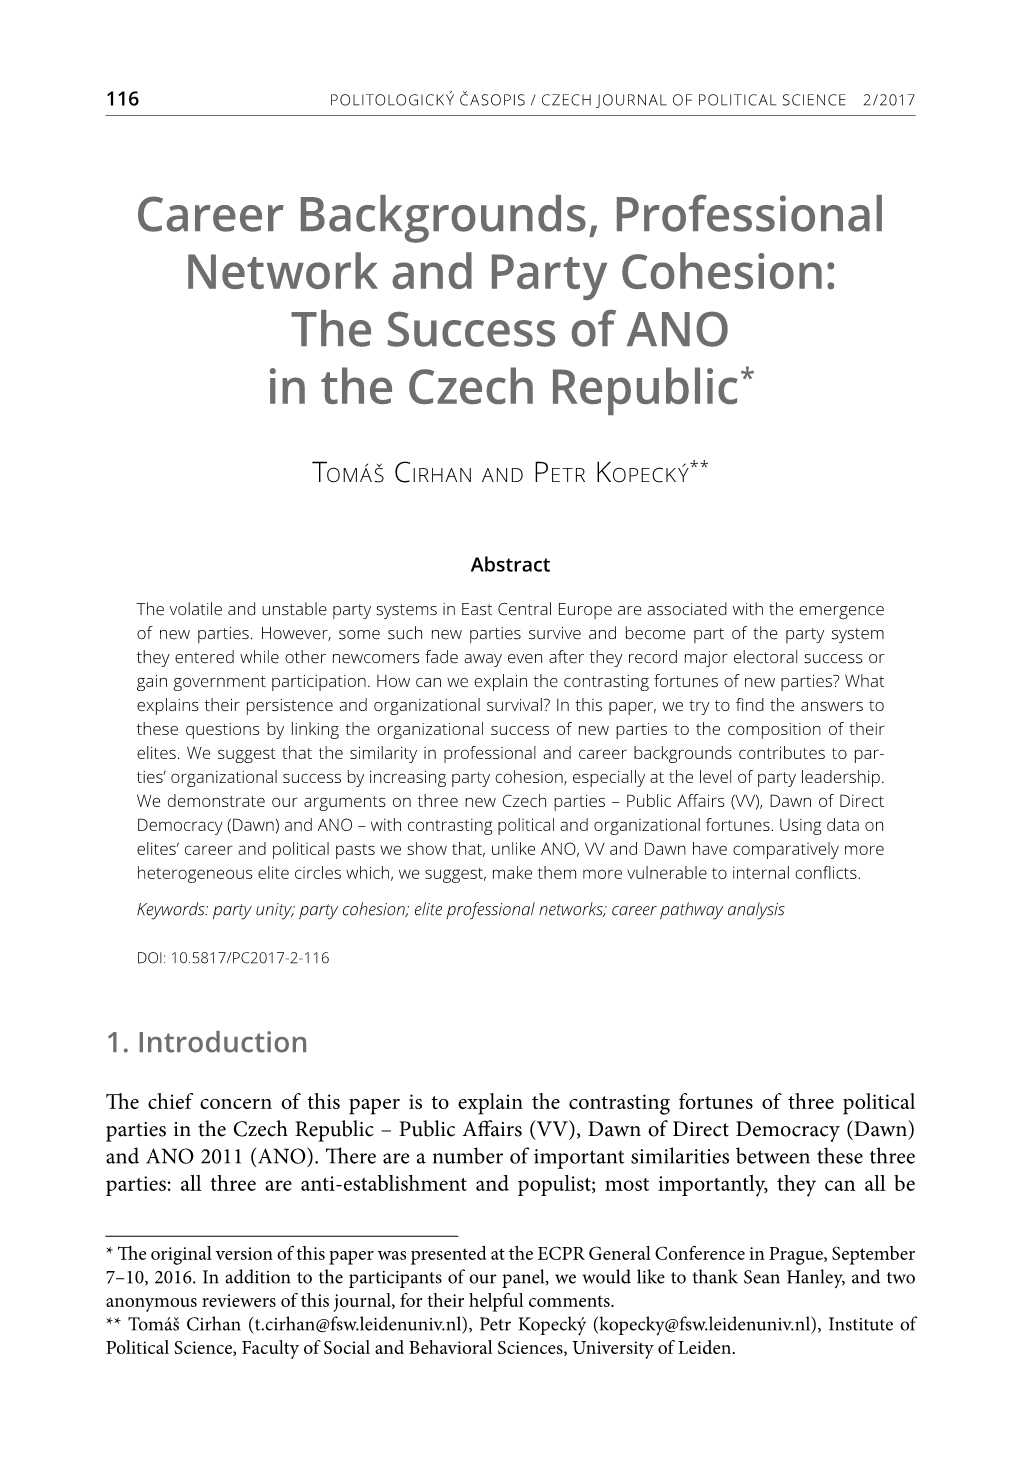 Career Backgrounds, Professional Network and Party Cohesion: the Success of ANO in the Czech Republic*